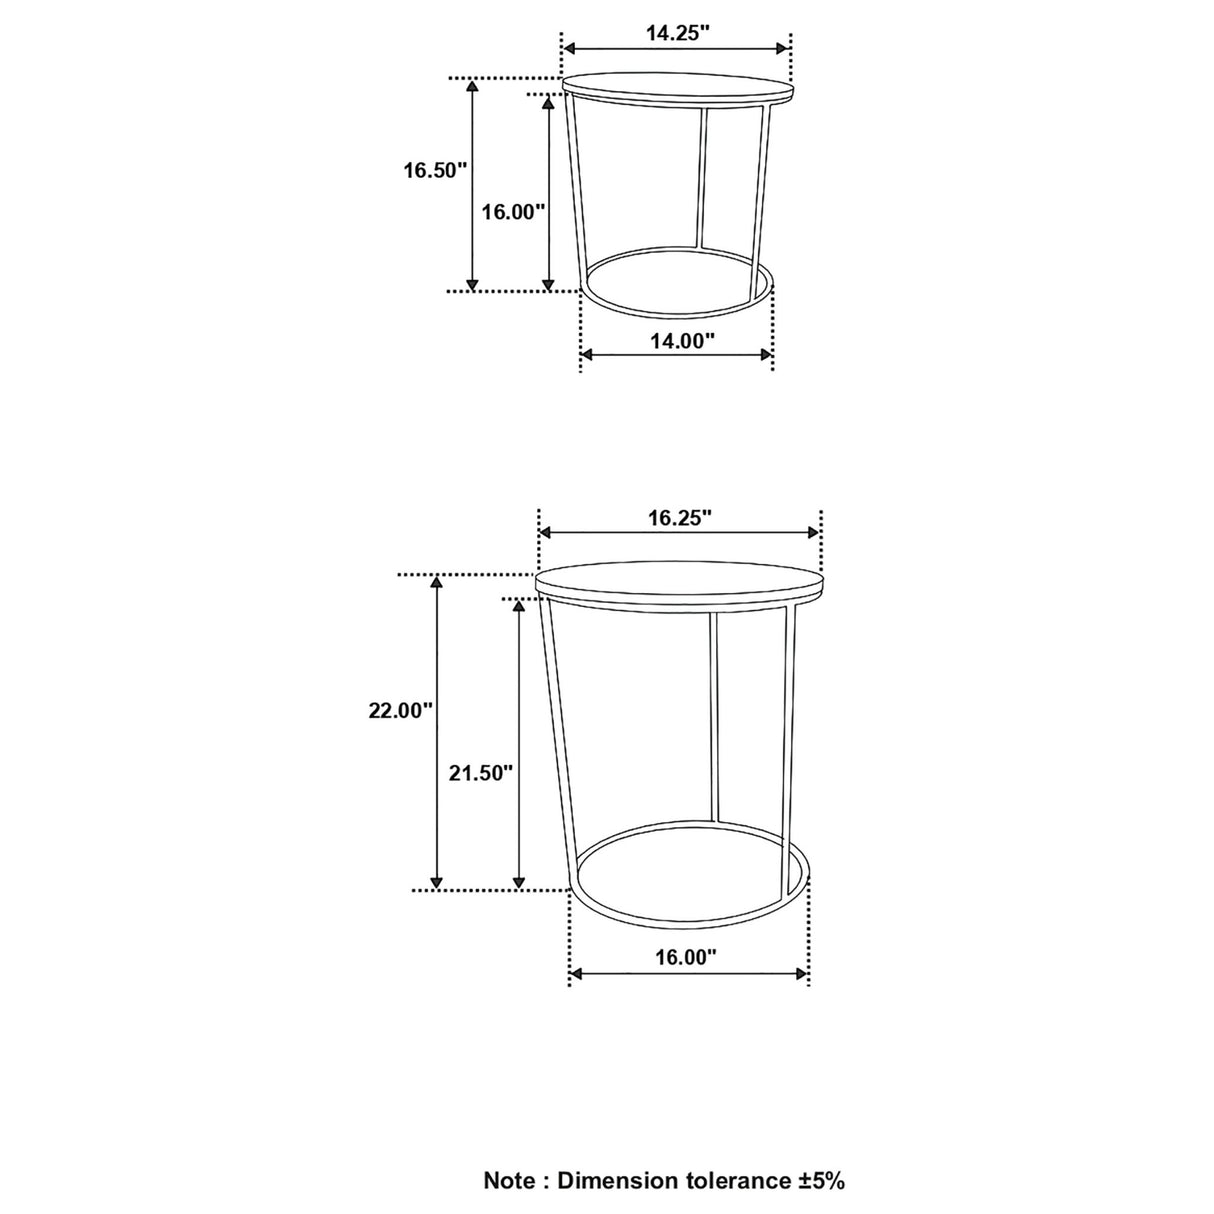 2 Pc Nesting Table - Vivienne 2-piece Round Marble Top Nesting Tables White and Gold